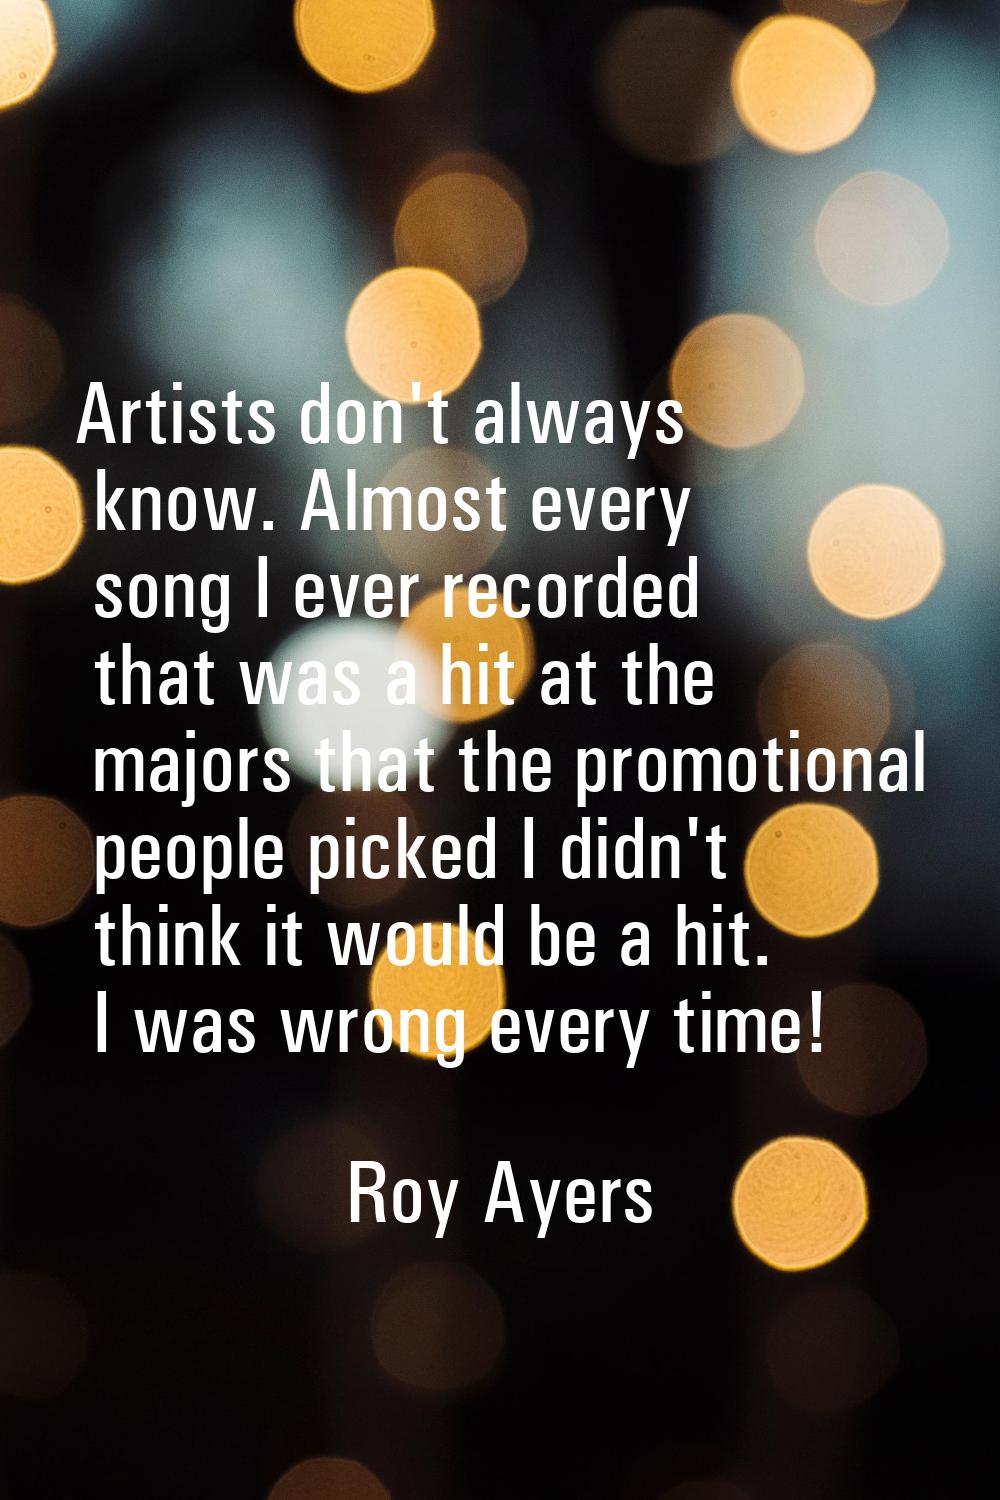 Artists don't always know. Almost every song I ever recorded that was a hit at the majors that the 